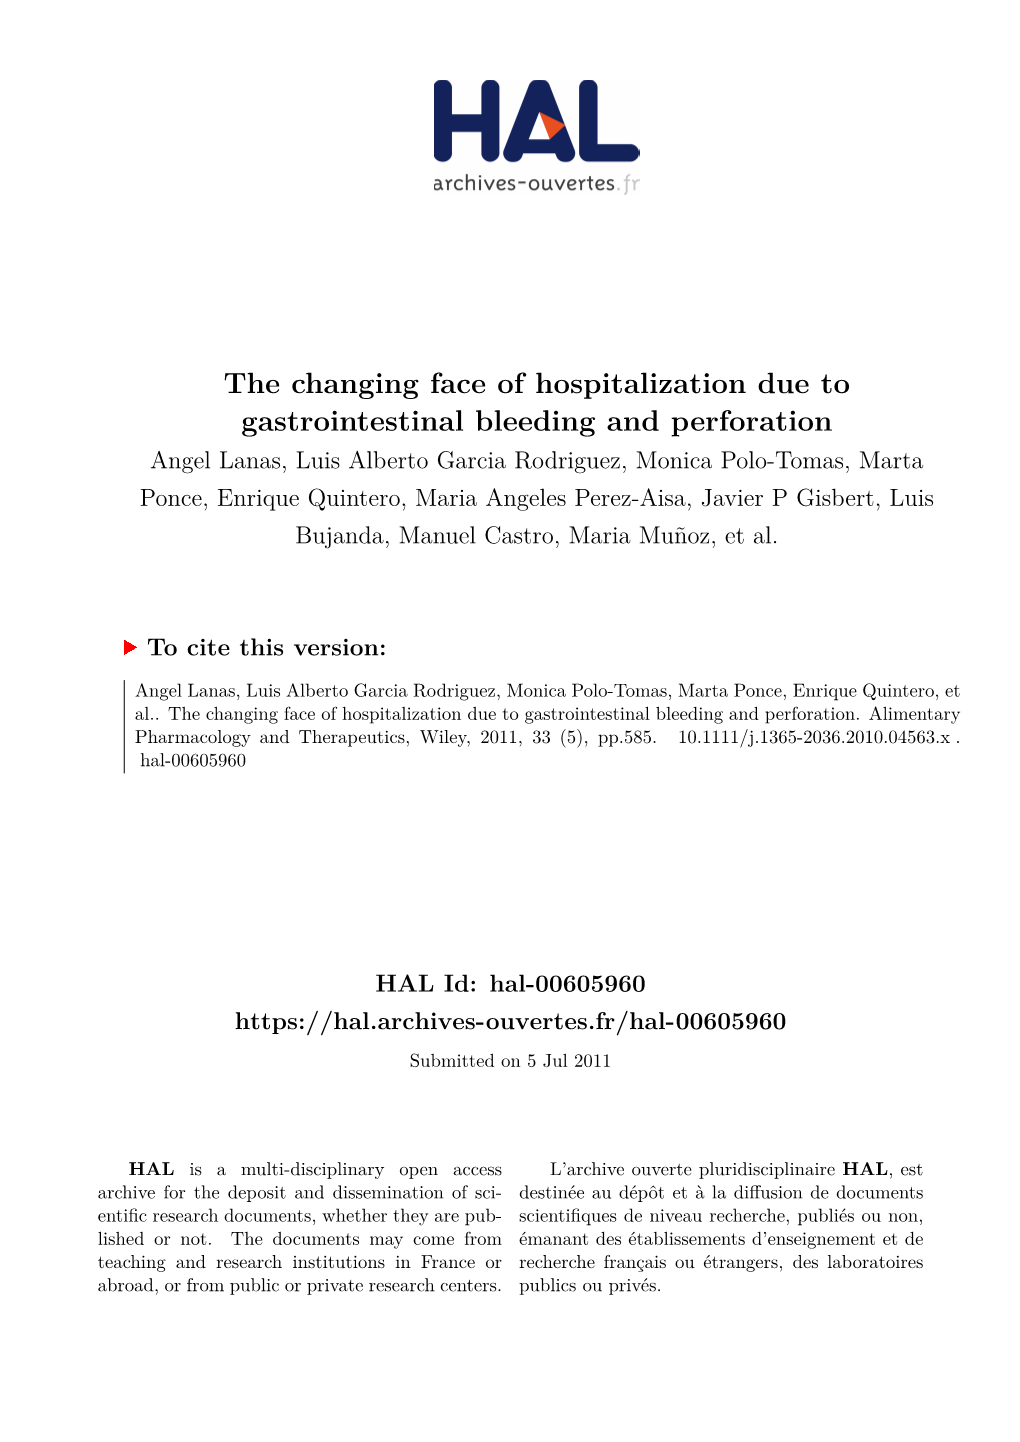 The Changing Face of Hospitalization Due to Gastrointestinal Bleeding And